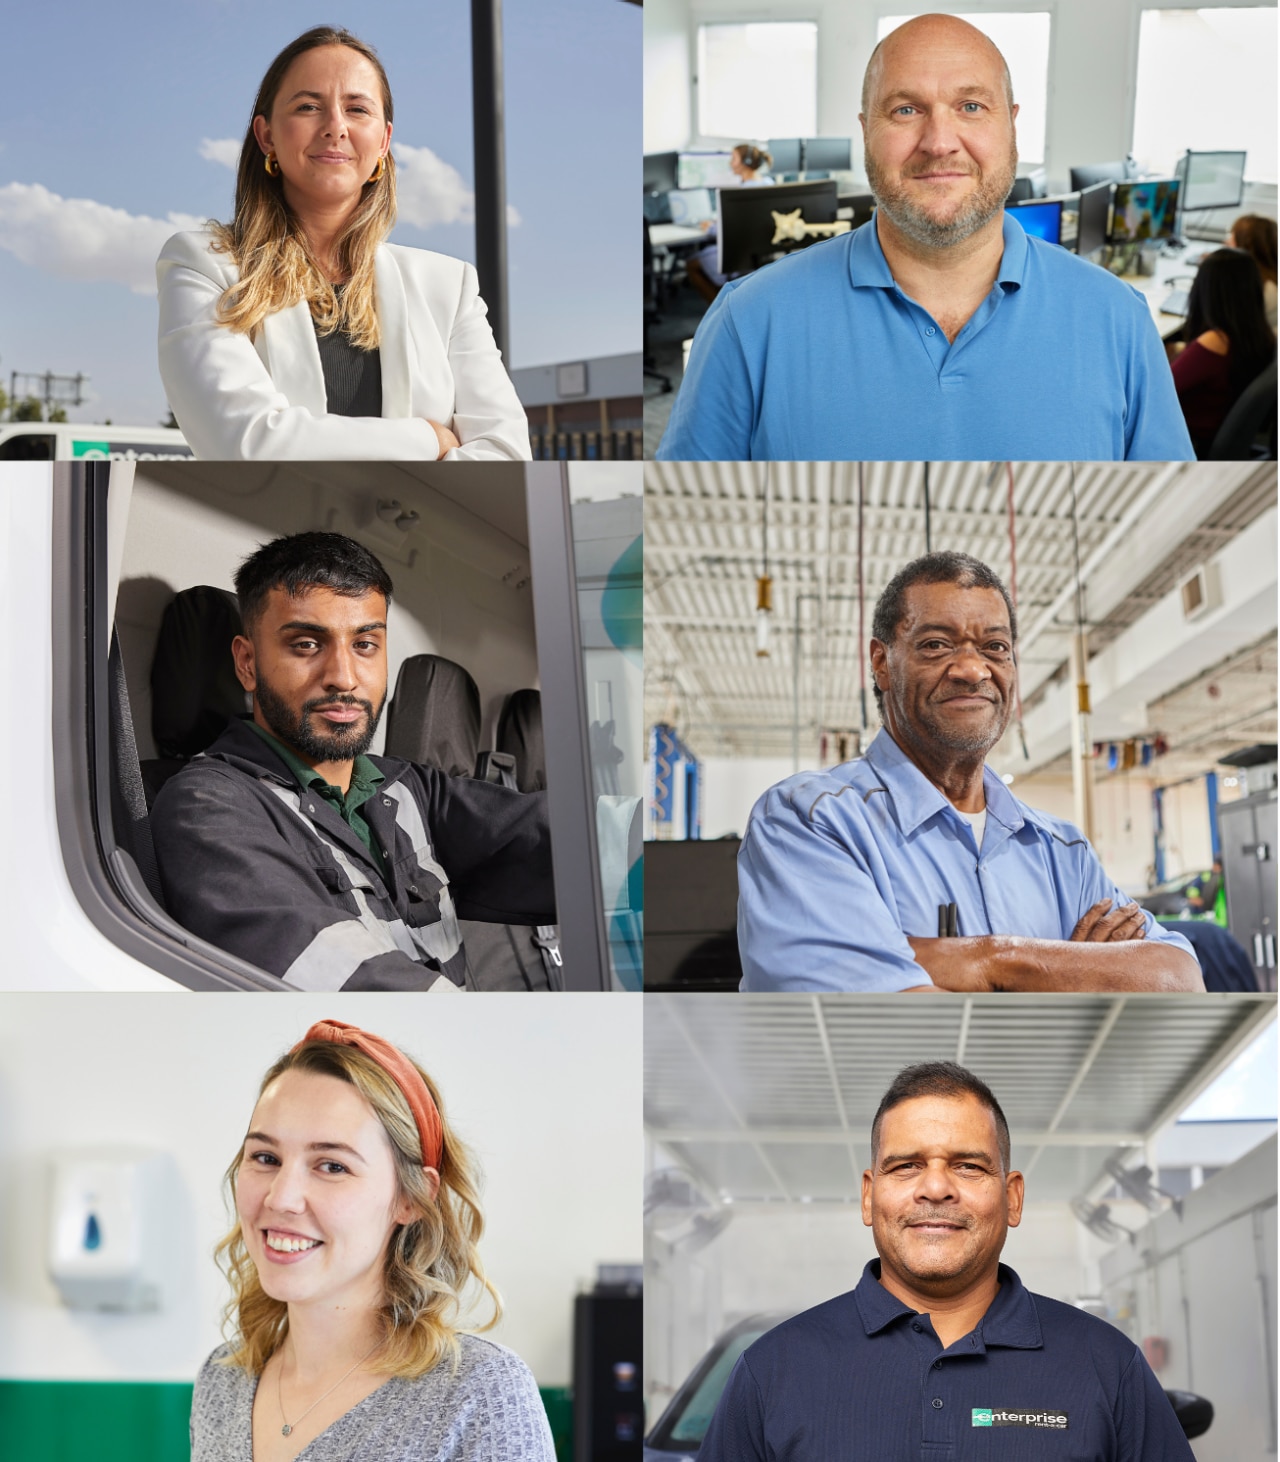 Nine different Enterprise employees, representing a wide range of diversity (gender, race, ethnicity, geographic, etc.), are arranged in a carousel image.